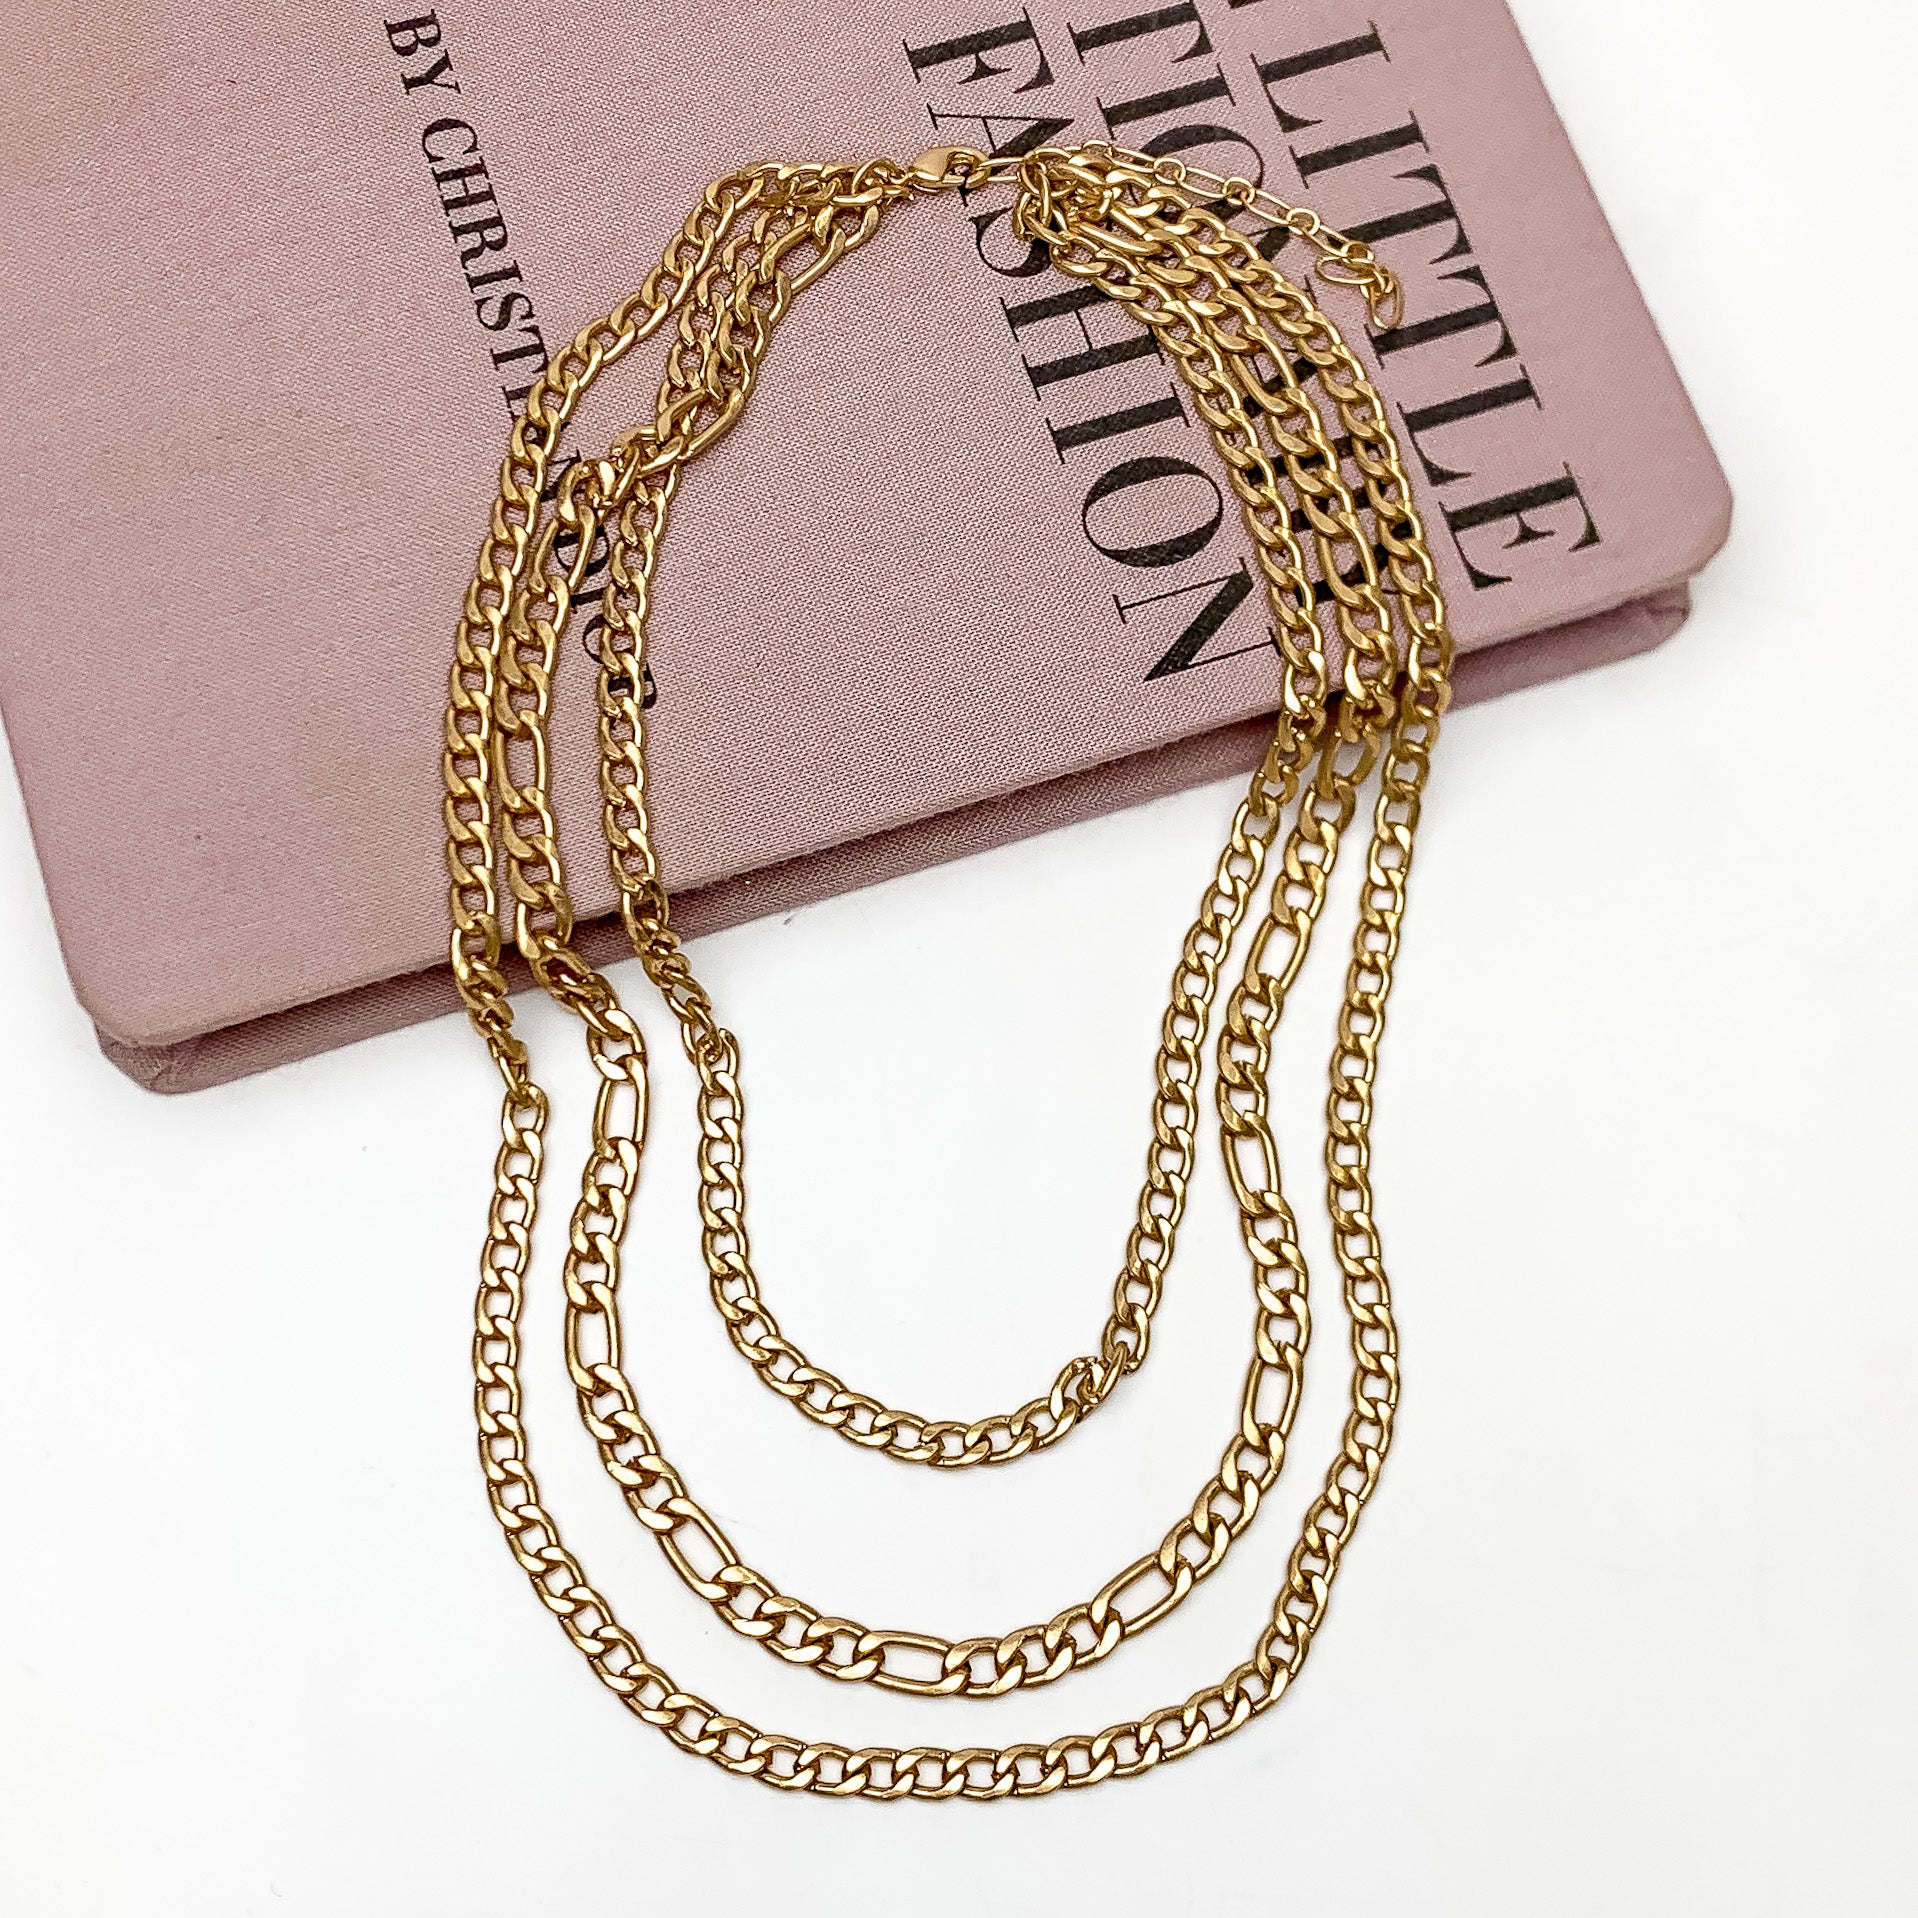 Multi Strand Curb Chain Necklace in Gold Tone - Giddy Up Glamour Boutique